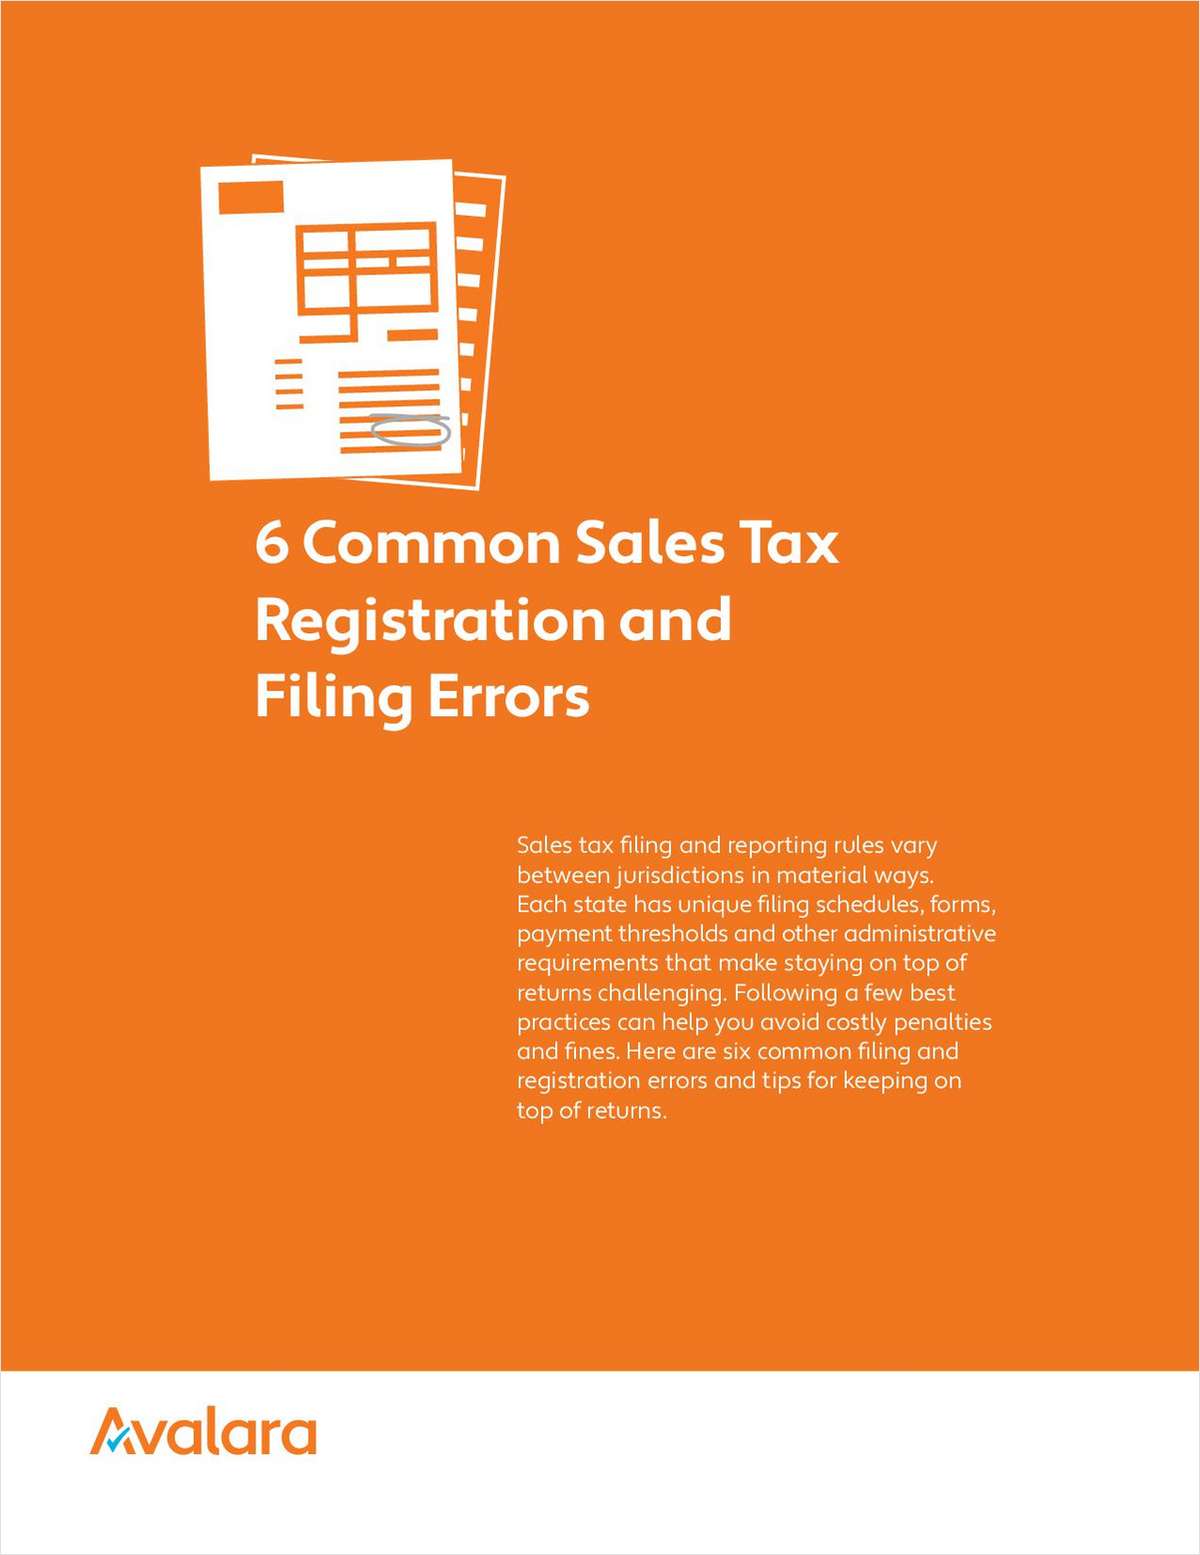 6 Common Sales Tax Registration and Filing Errors